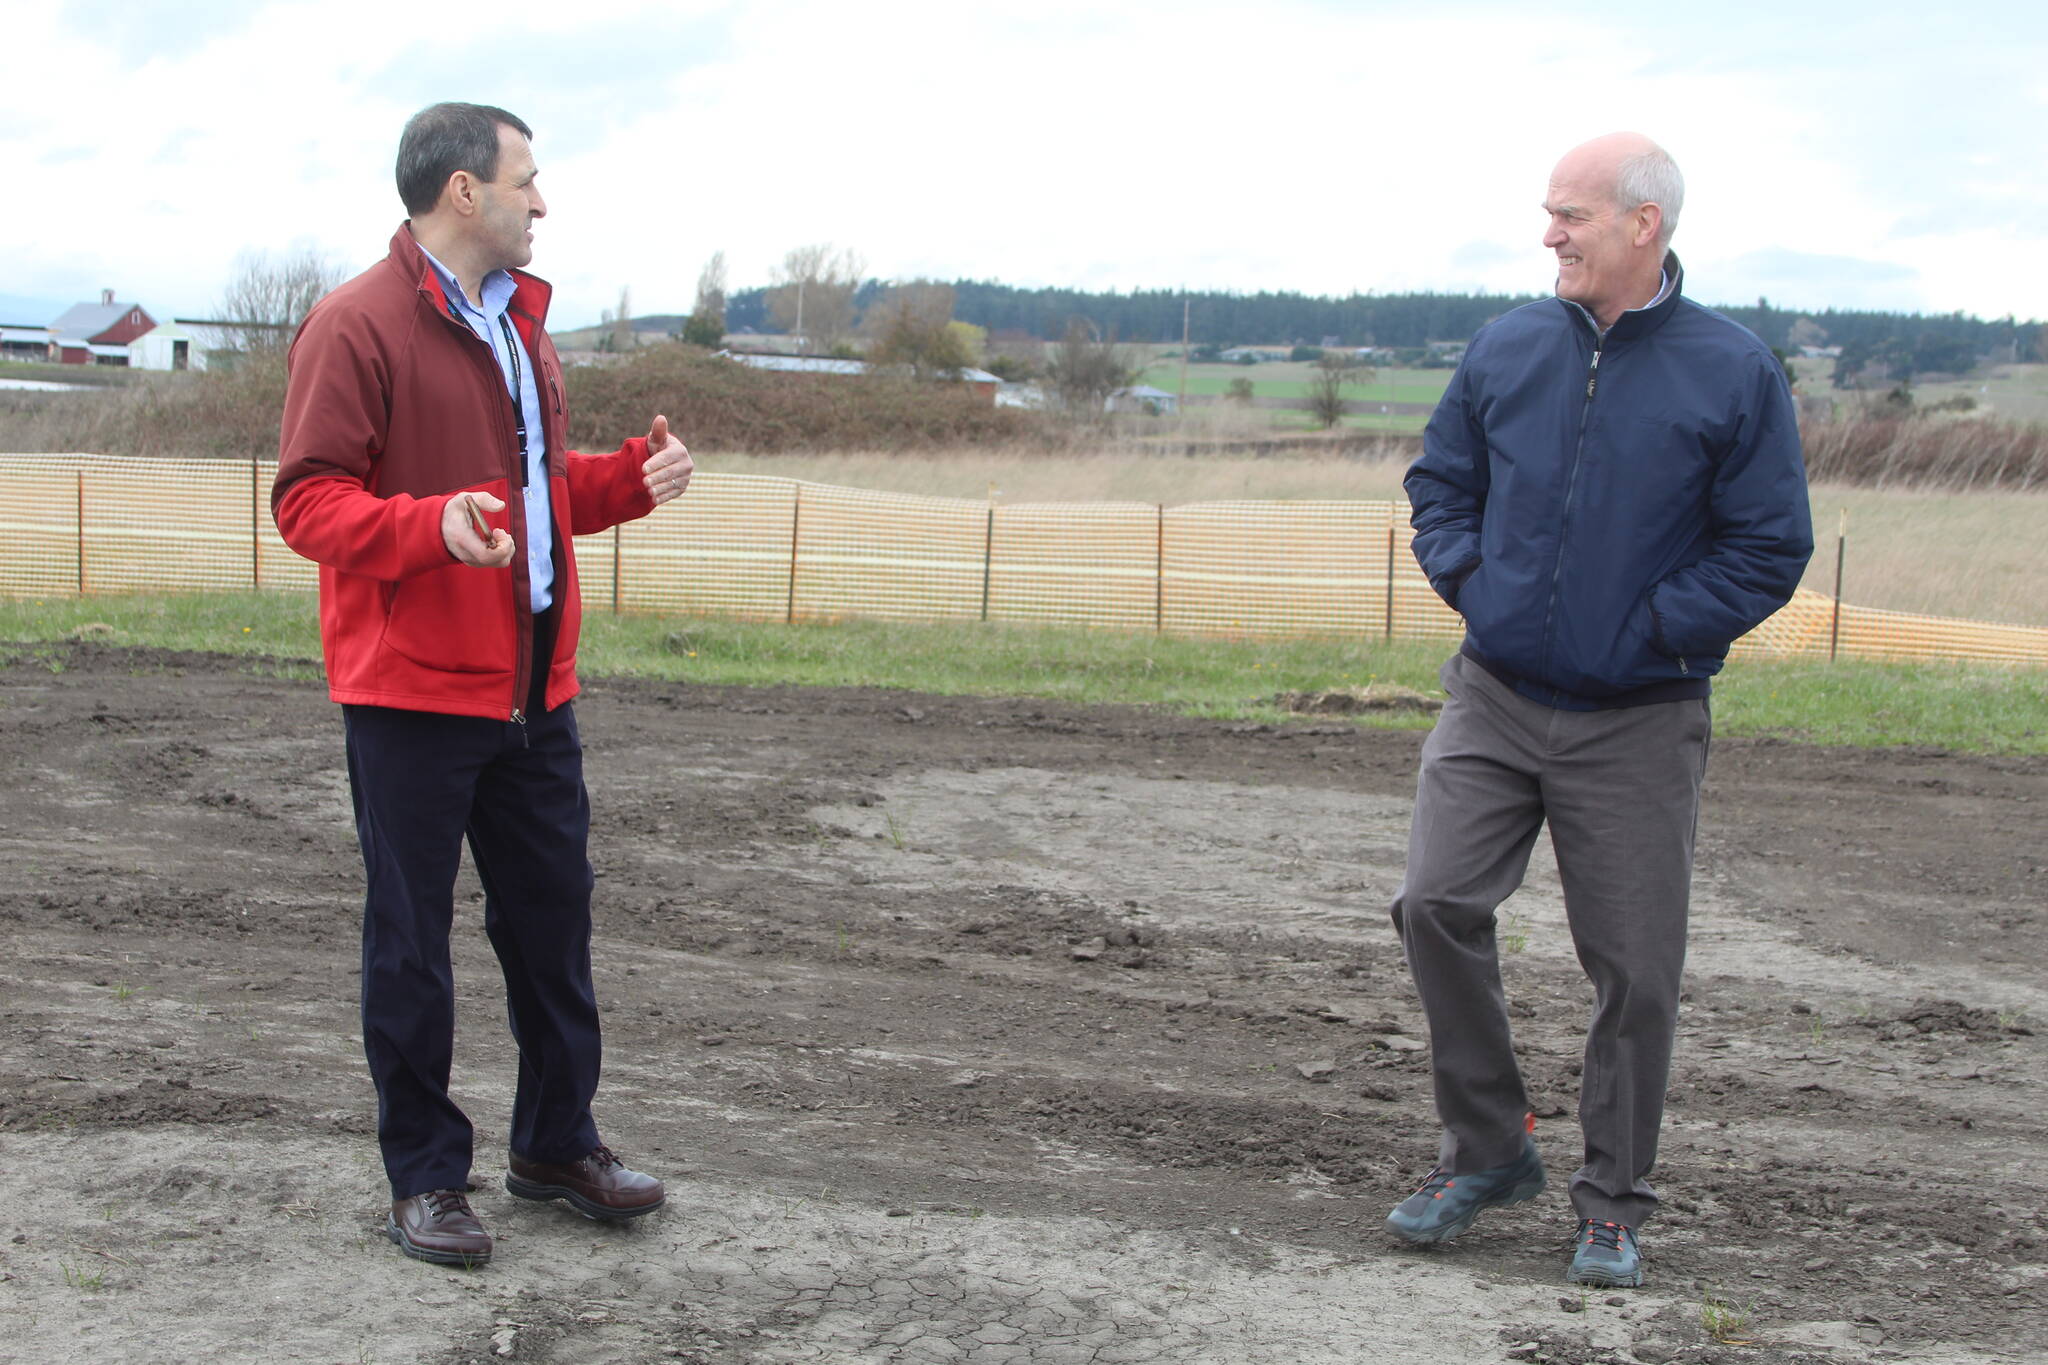 Photo by Karina Andrew/Whidbey News-Times
Ken Salem shows Rick Larsen around the site where the gymnasium will be built at the new Boys and Girls Club.